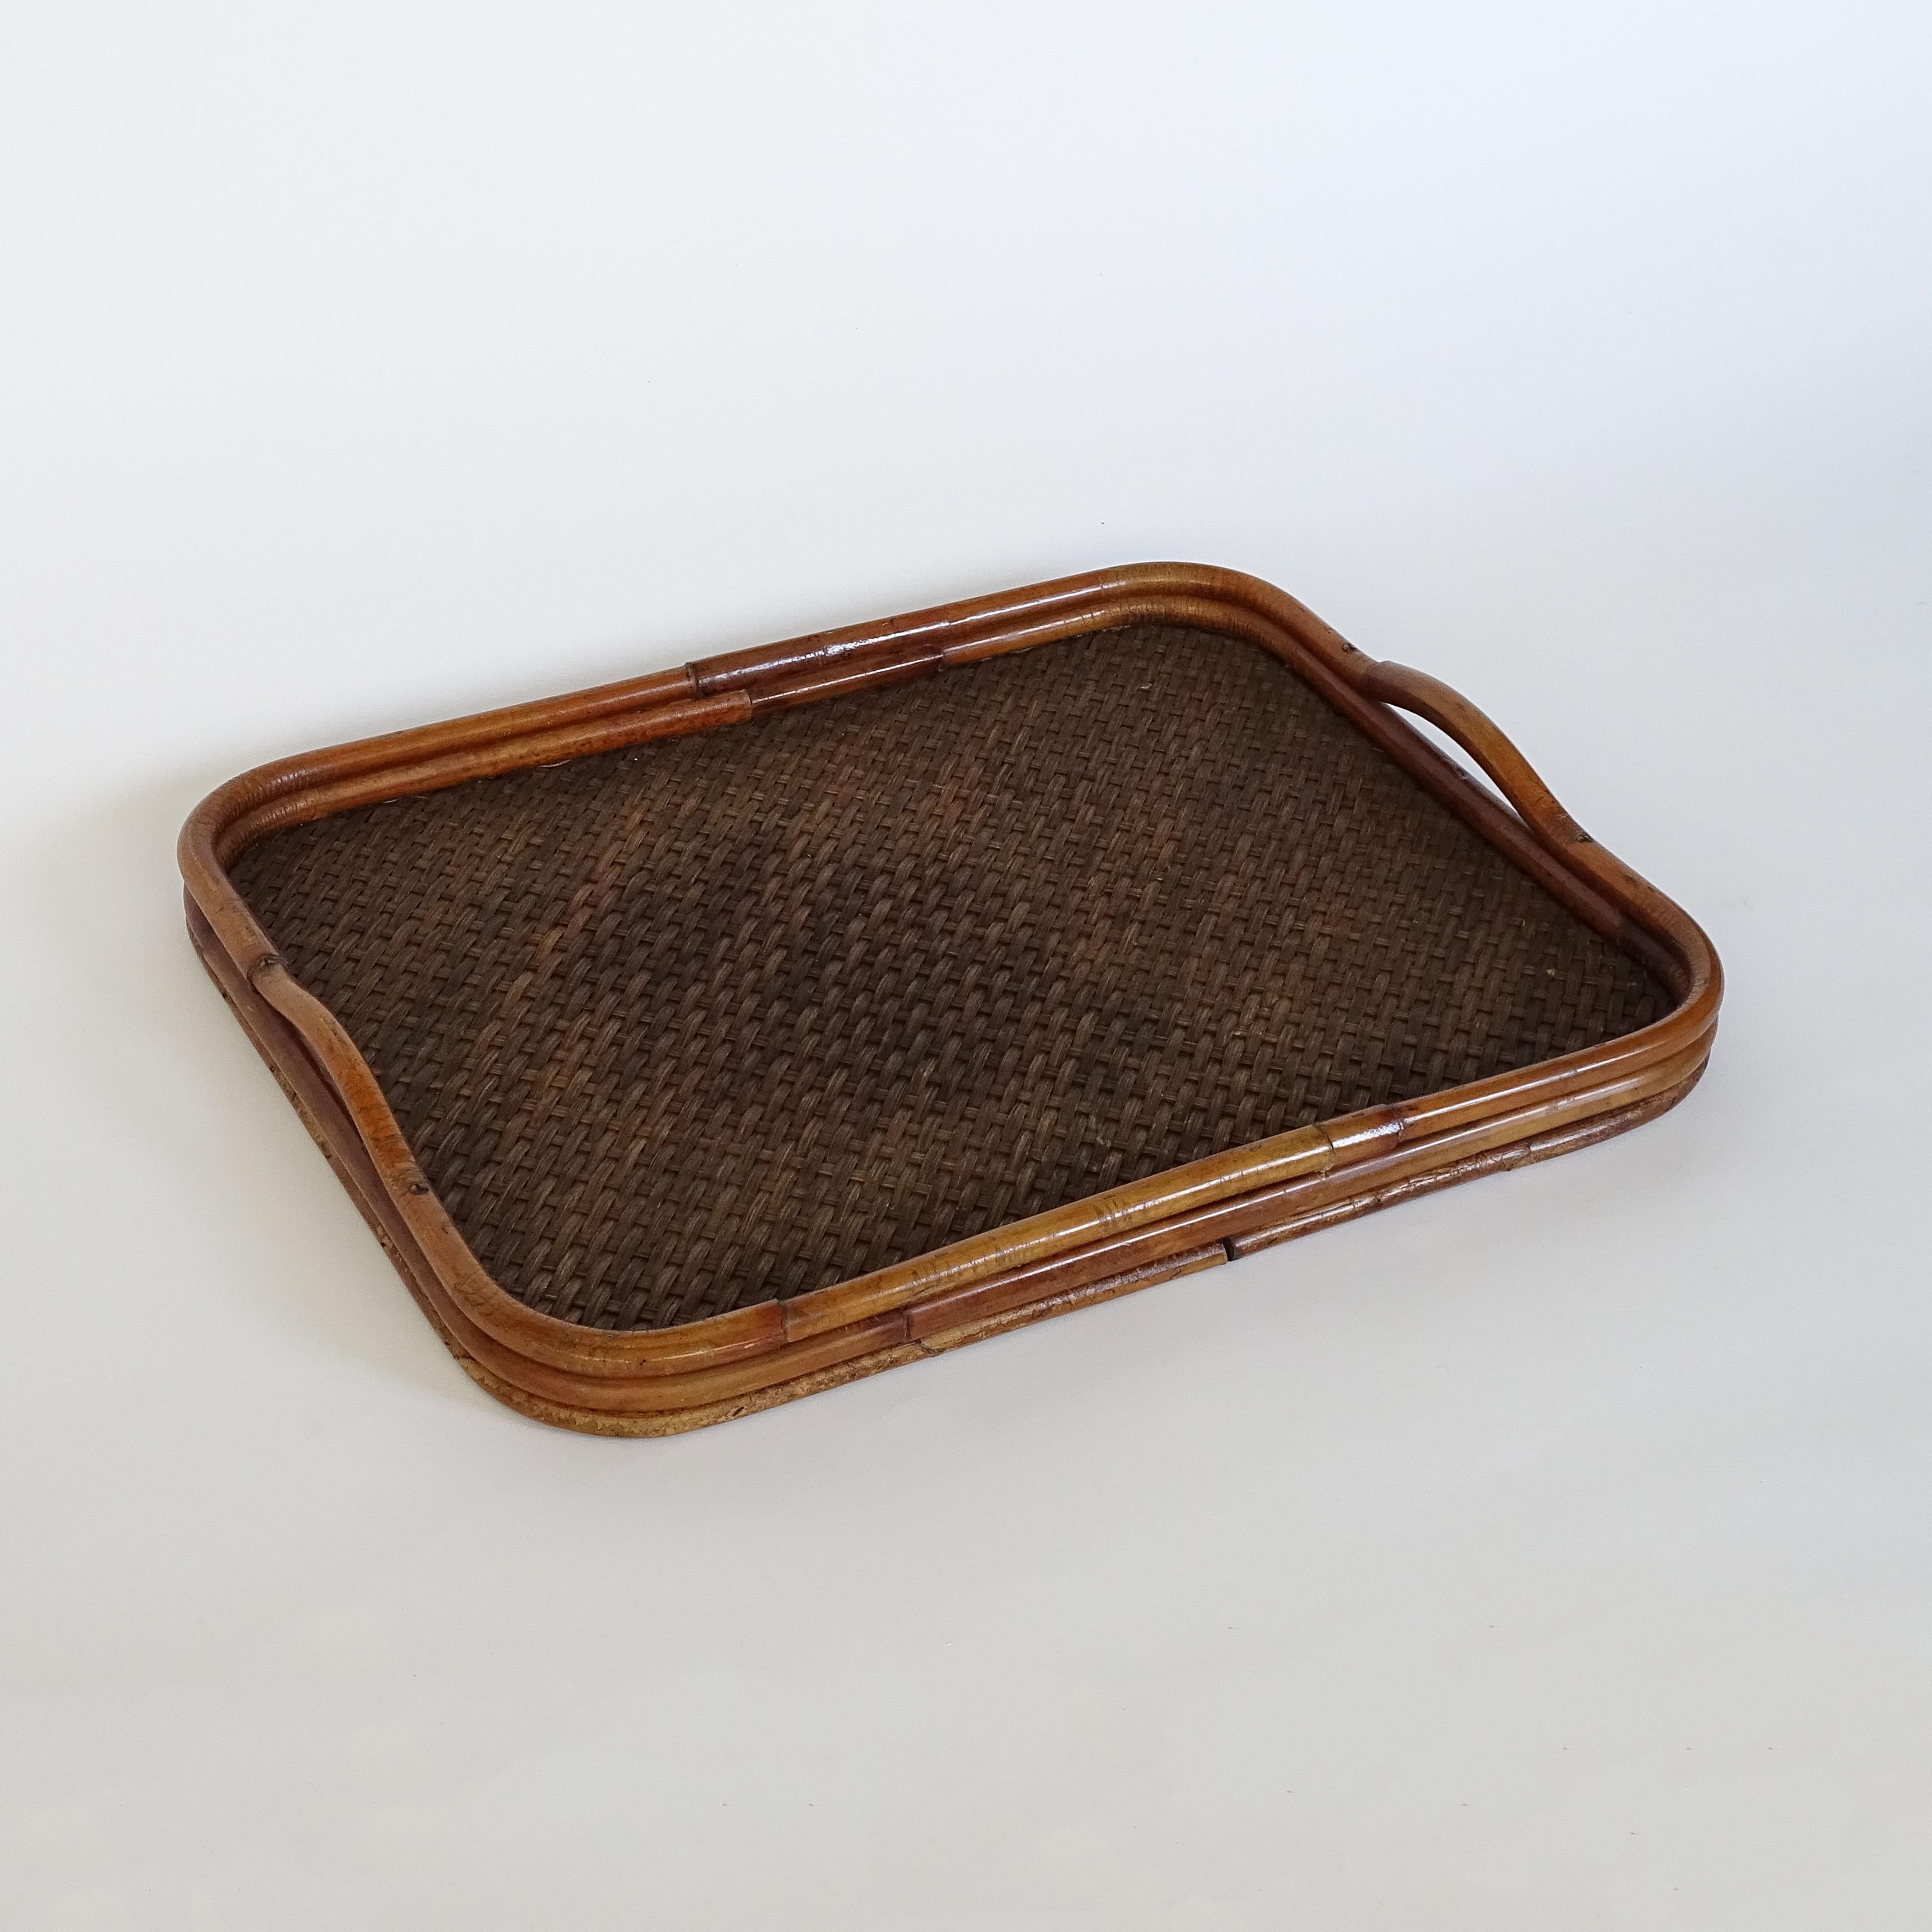 Gabriella Crespi Bamboo and rattan large serving tray, Italy, 1970s.